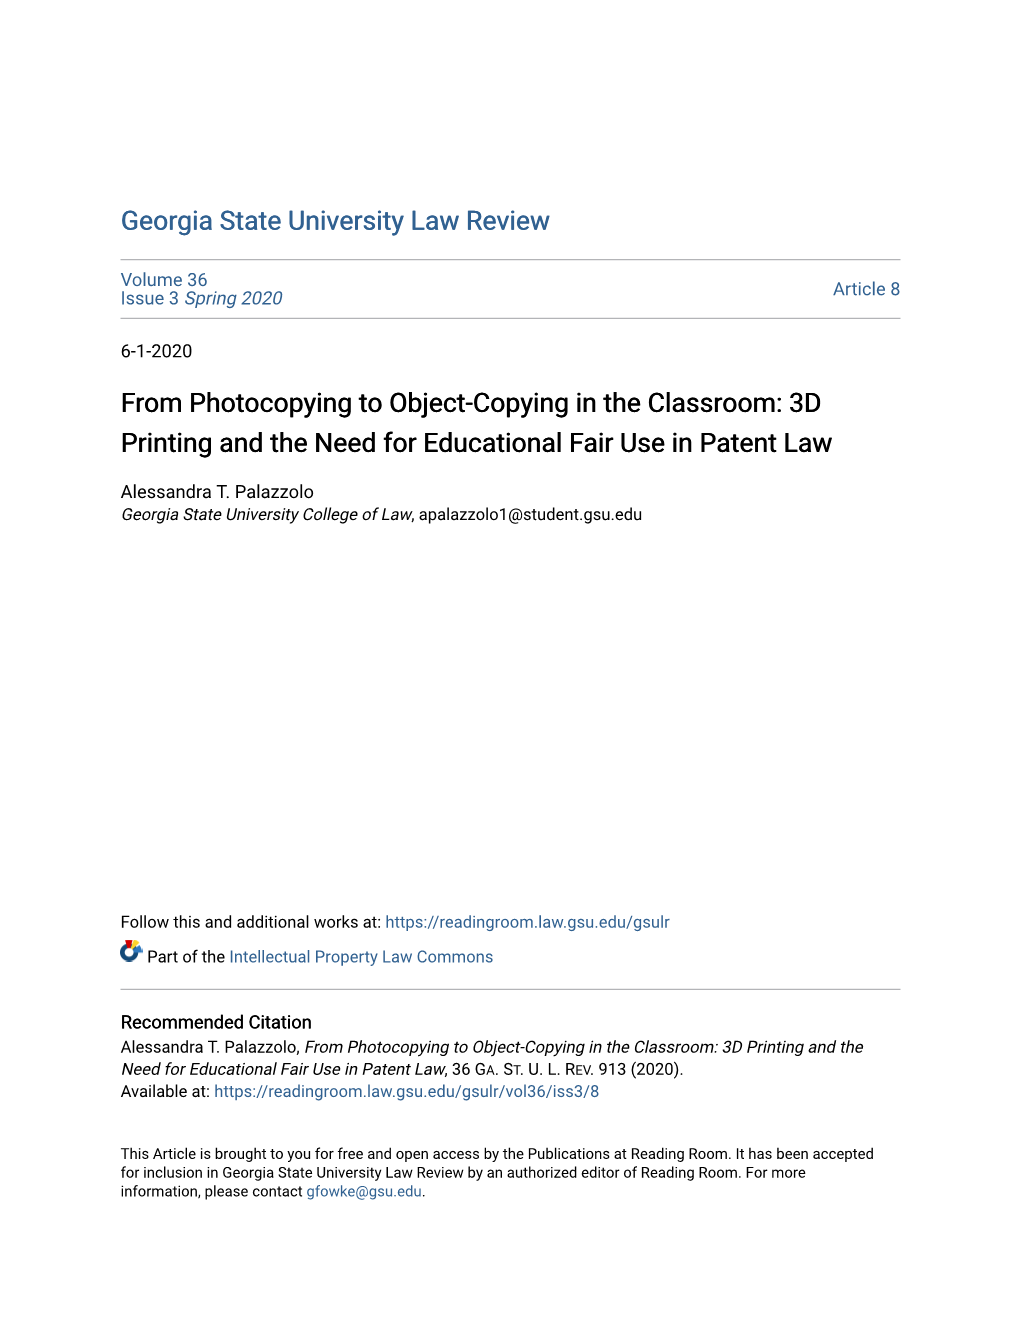 From Photocopying to Object-Copying in the Classroom: 3D Printing and the Need for Educational Fair Use in Patent Law